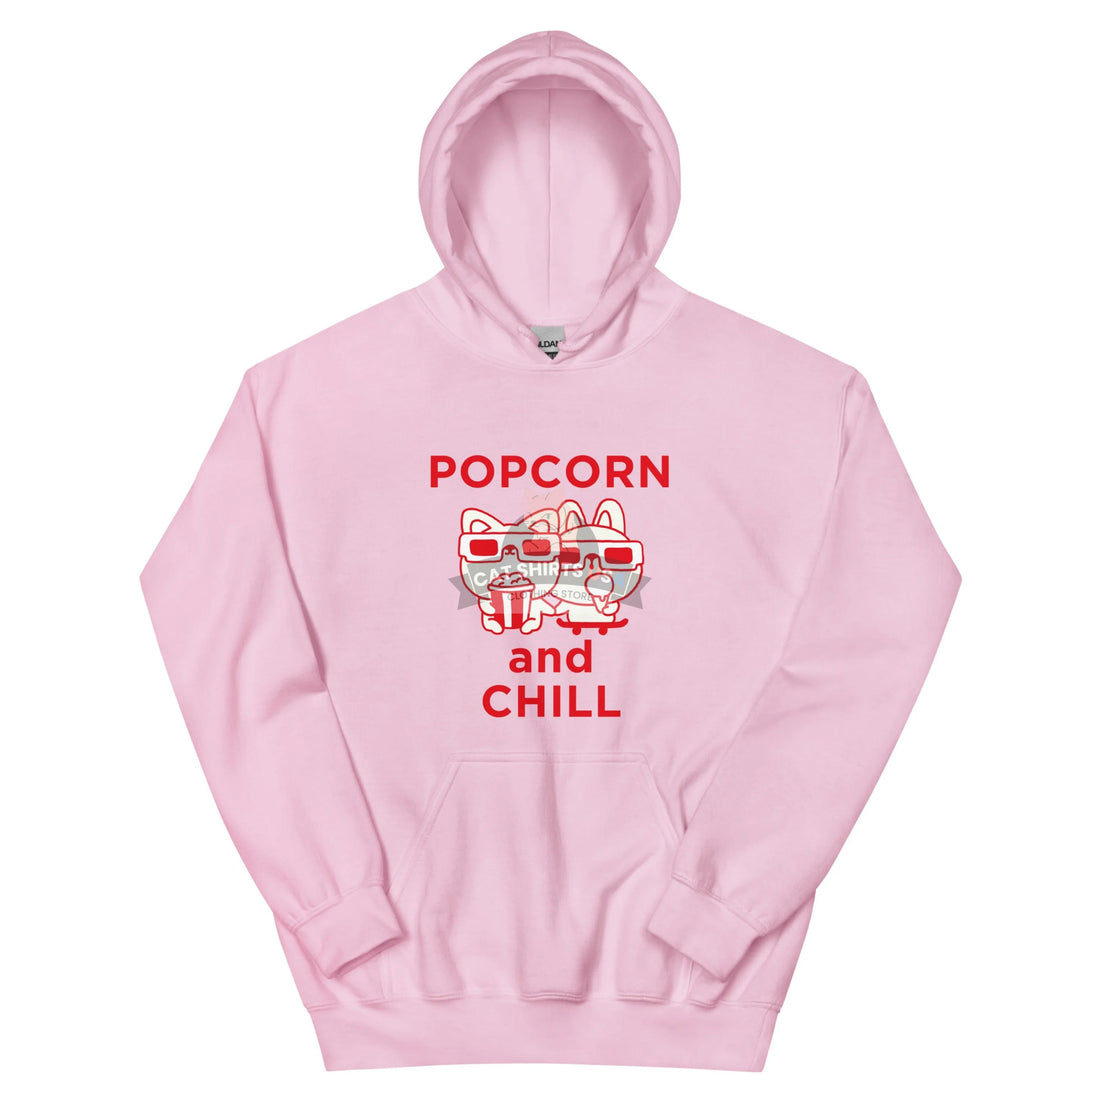 Popcorn and Chill Cat Hoodie - Light Pink / S Unisex